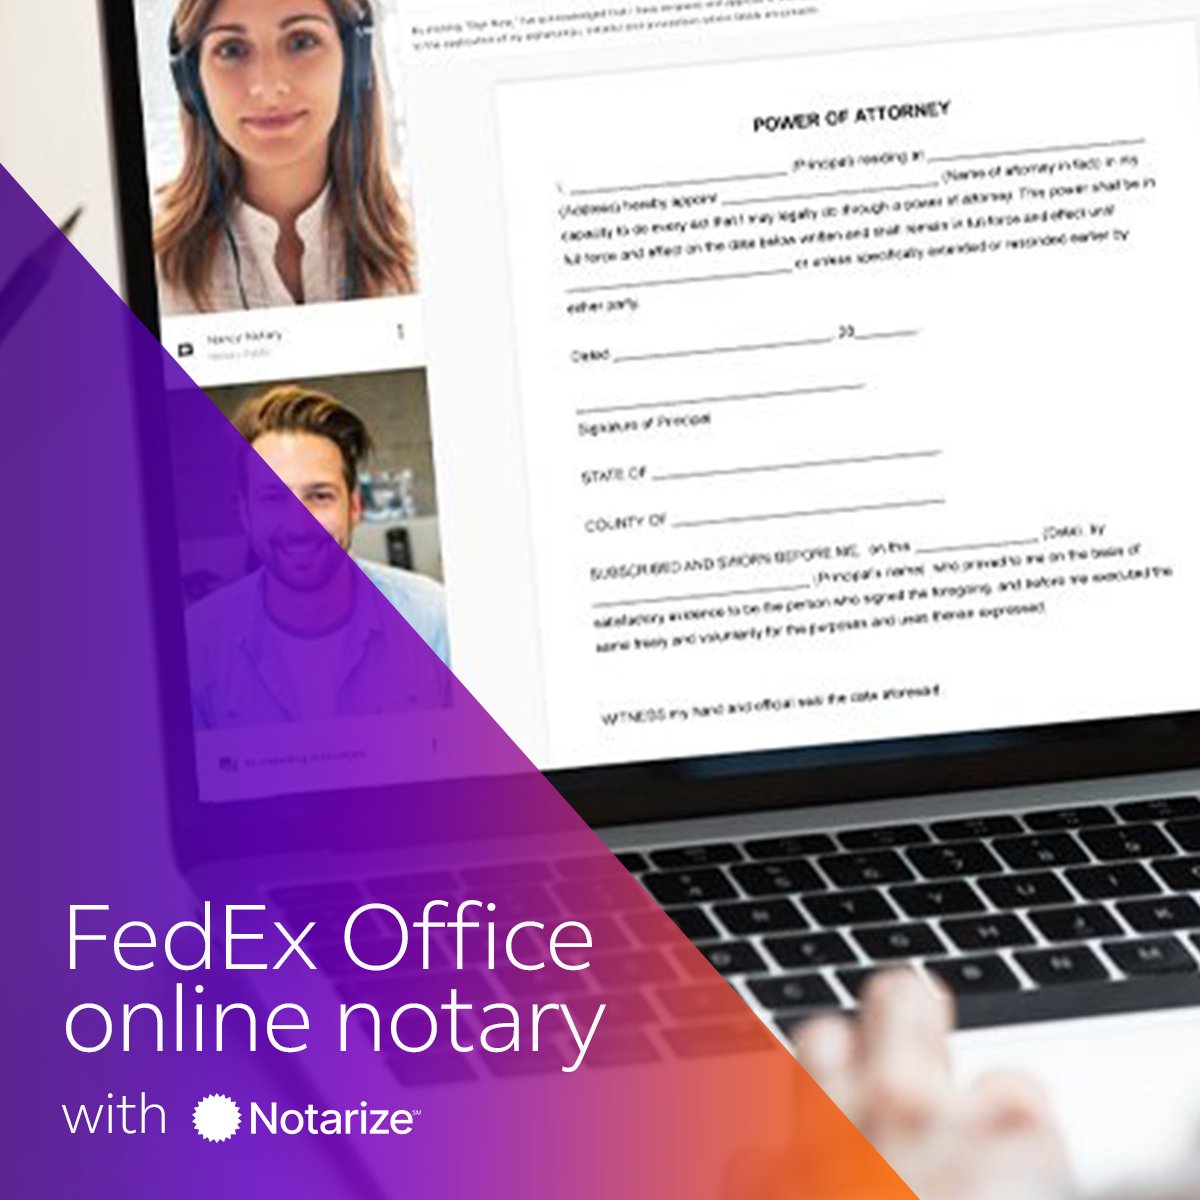 Get your Notarizations done when it's convenient for you, entirely online. 🖥️ Choose FedEx Office Online #Notary with @notarize office.fedex.com/default/online…